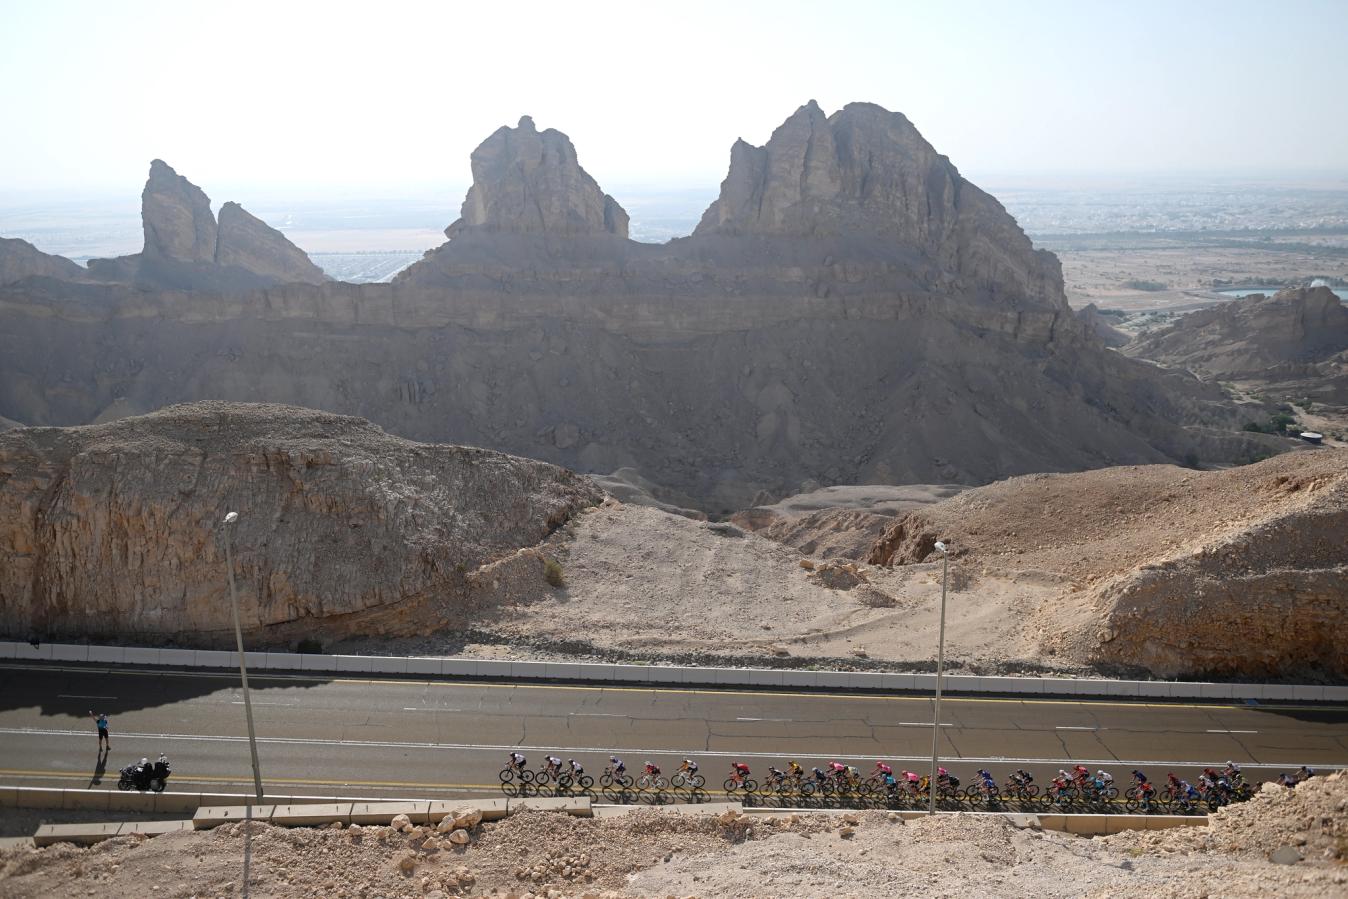 The UAE Tour, launched in 2019, is the biggest cycling event in the Middle East